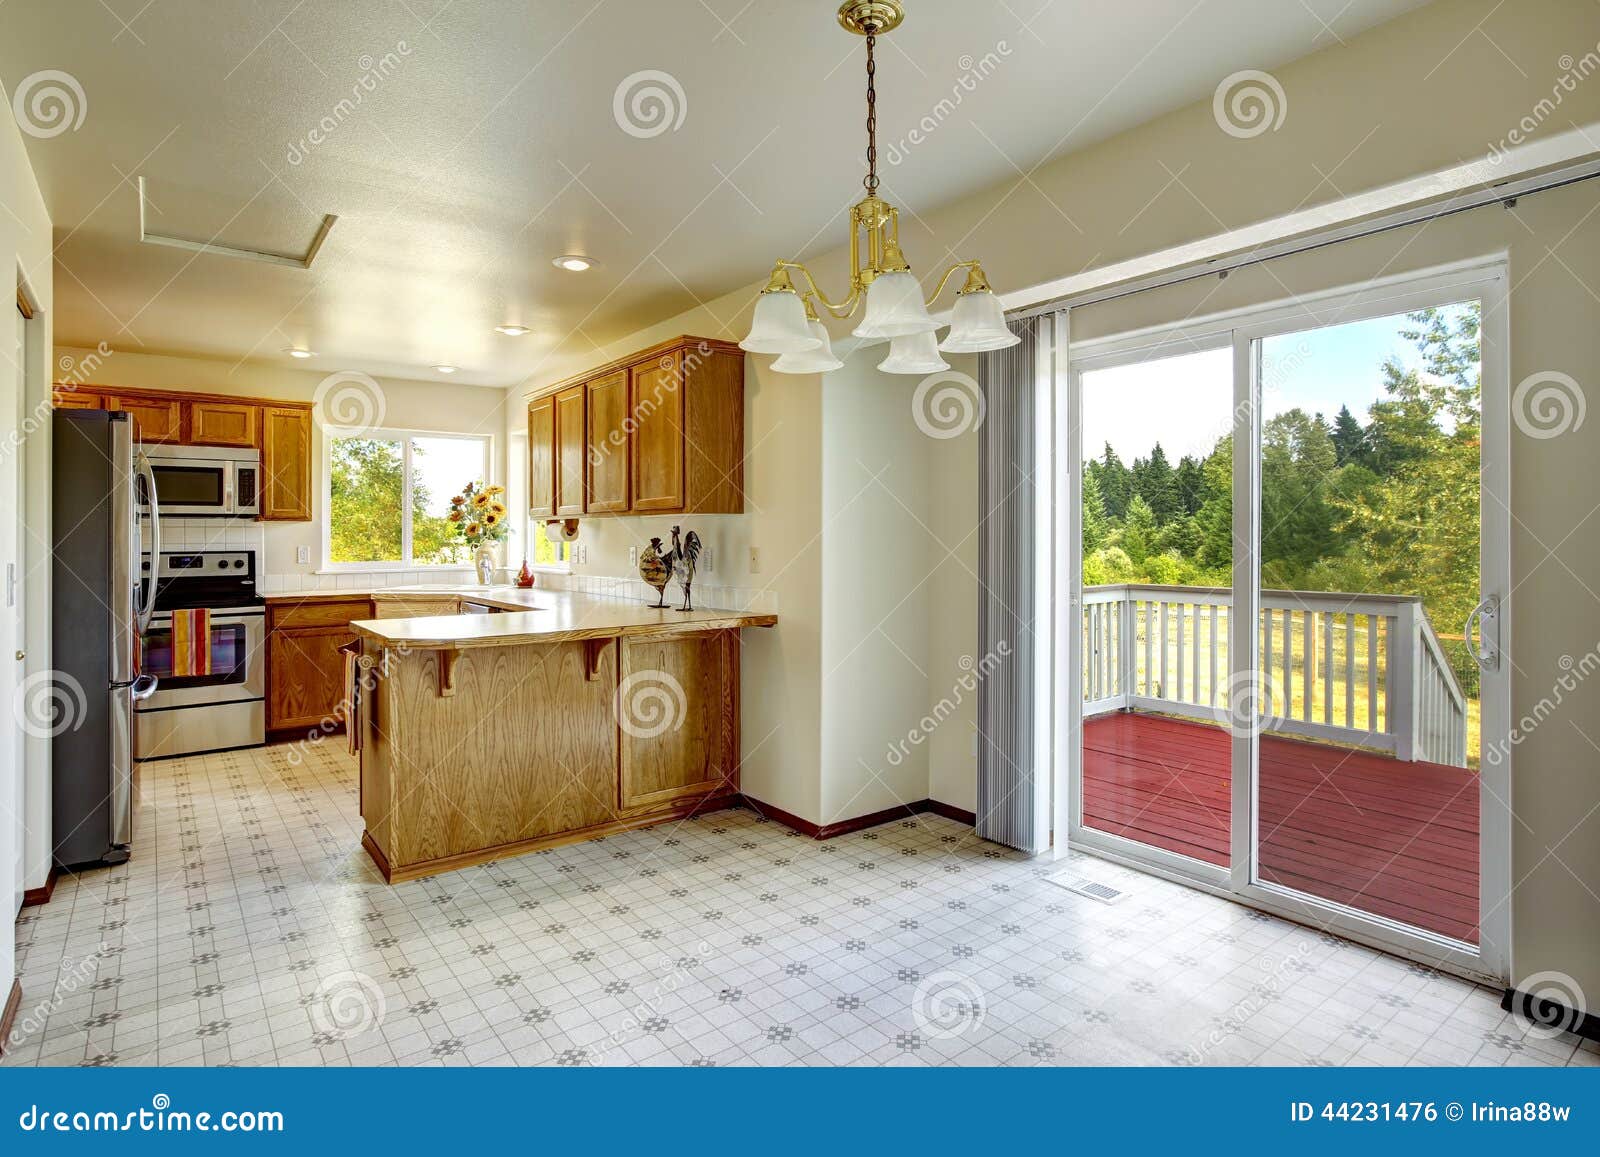 countryside house interior. bright kitchen room with walkout dec